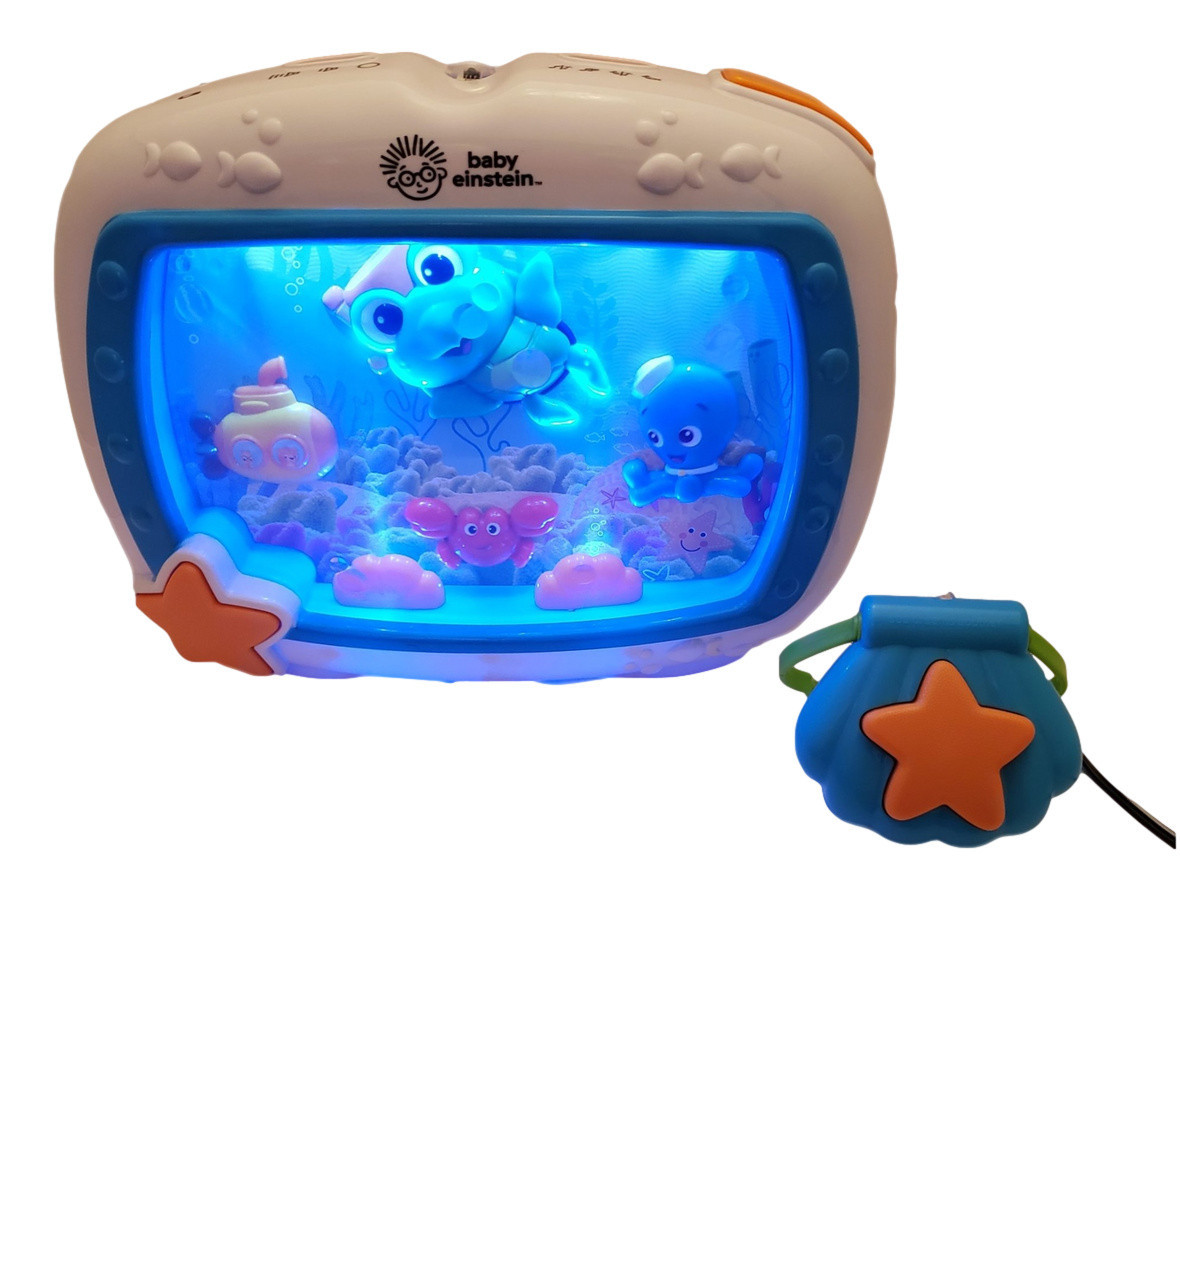  Baby Einstein Sea Dreams Soother Musical Crib Toy and